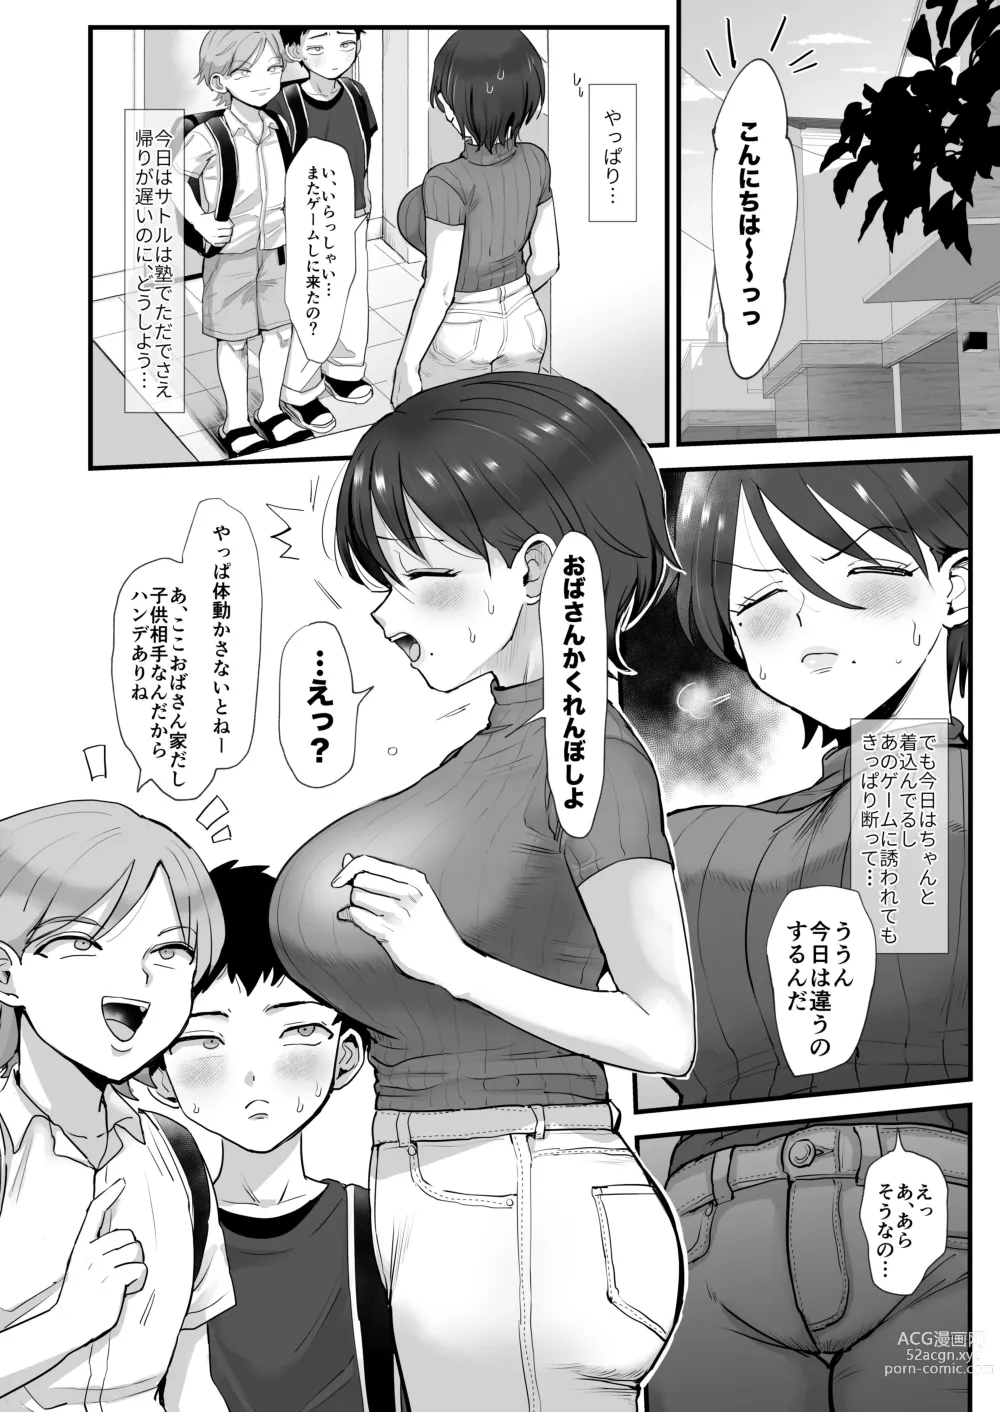 Page 20 of doujinshi Gentle, Busty, Narrow Eyed Momma.